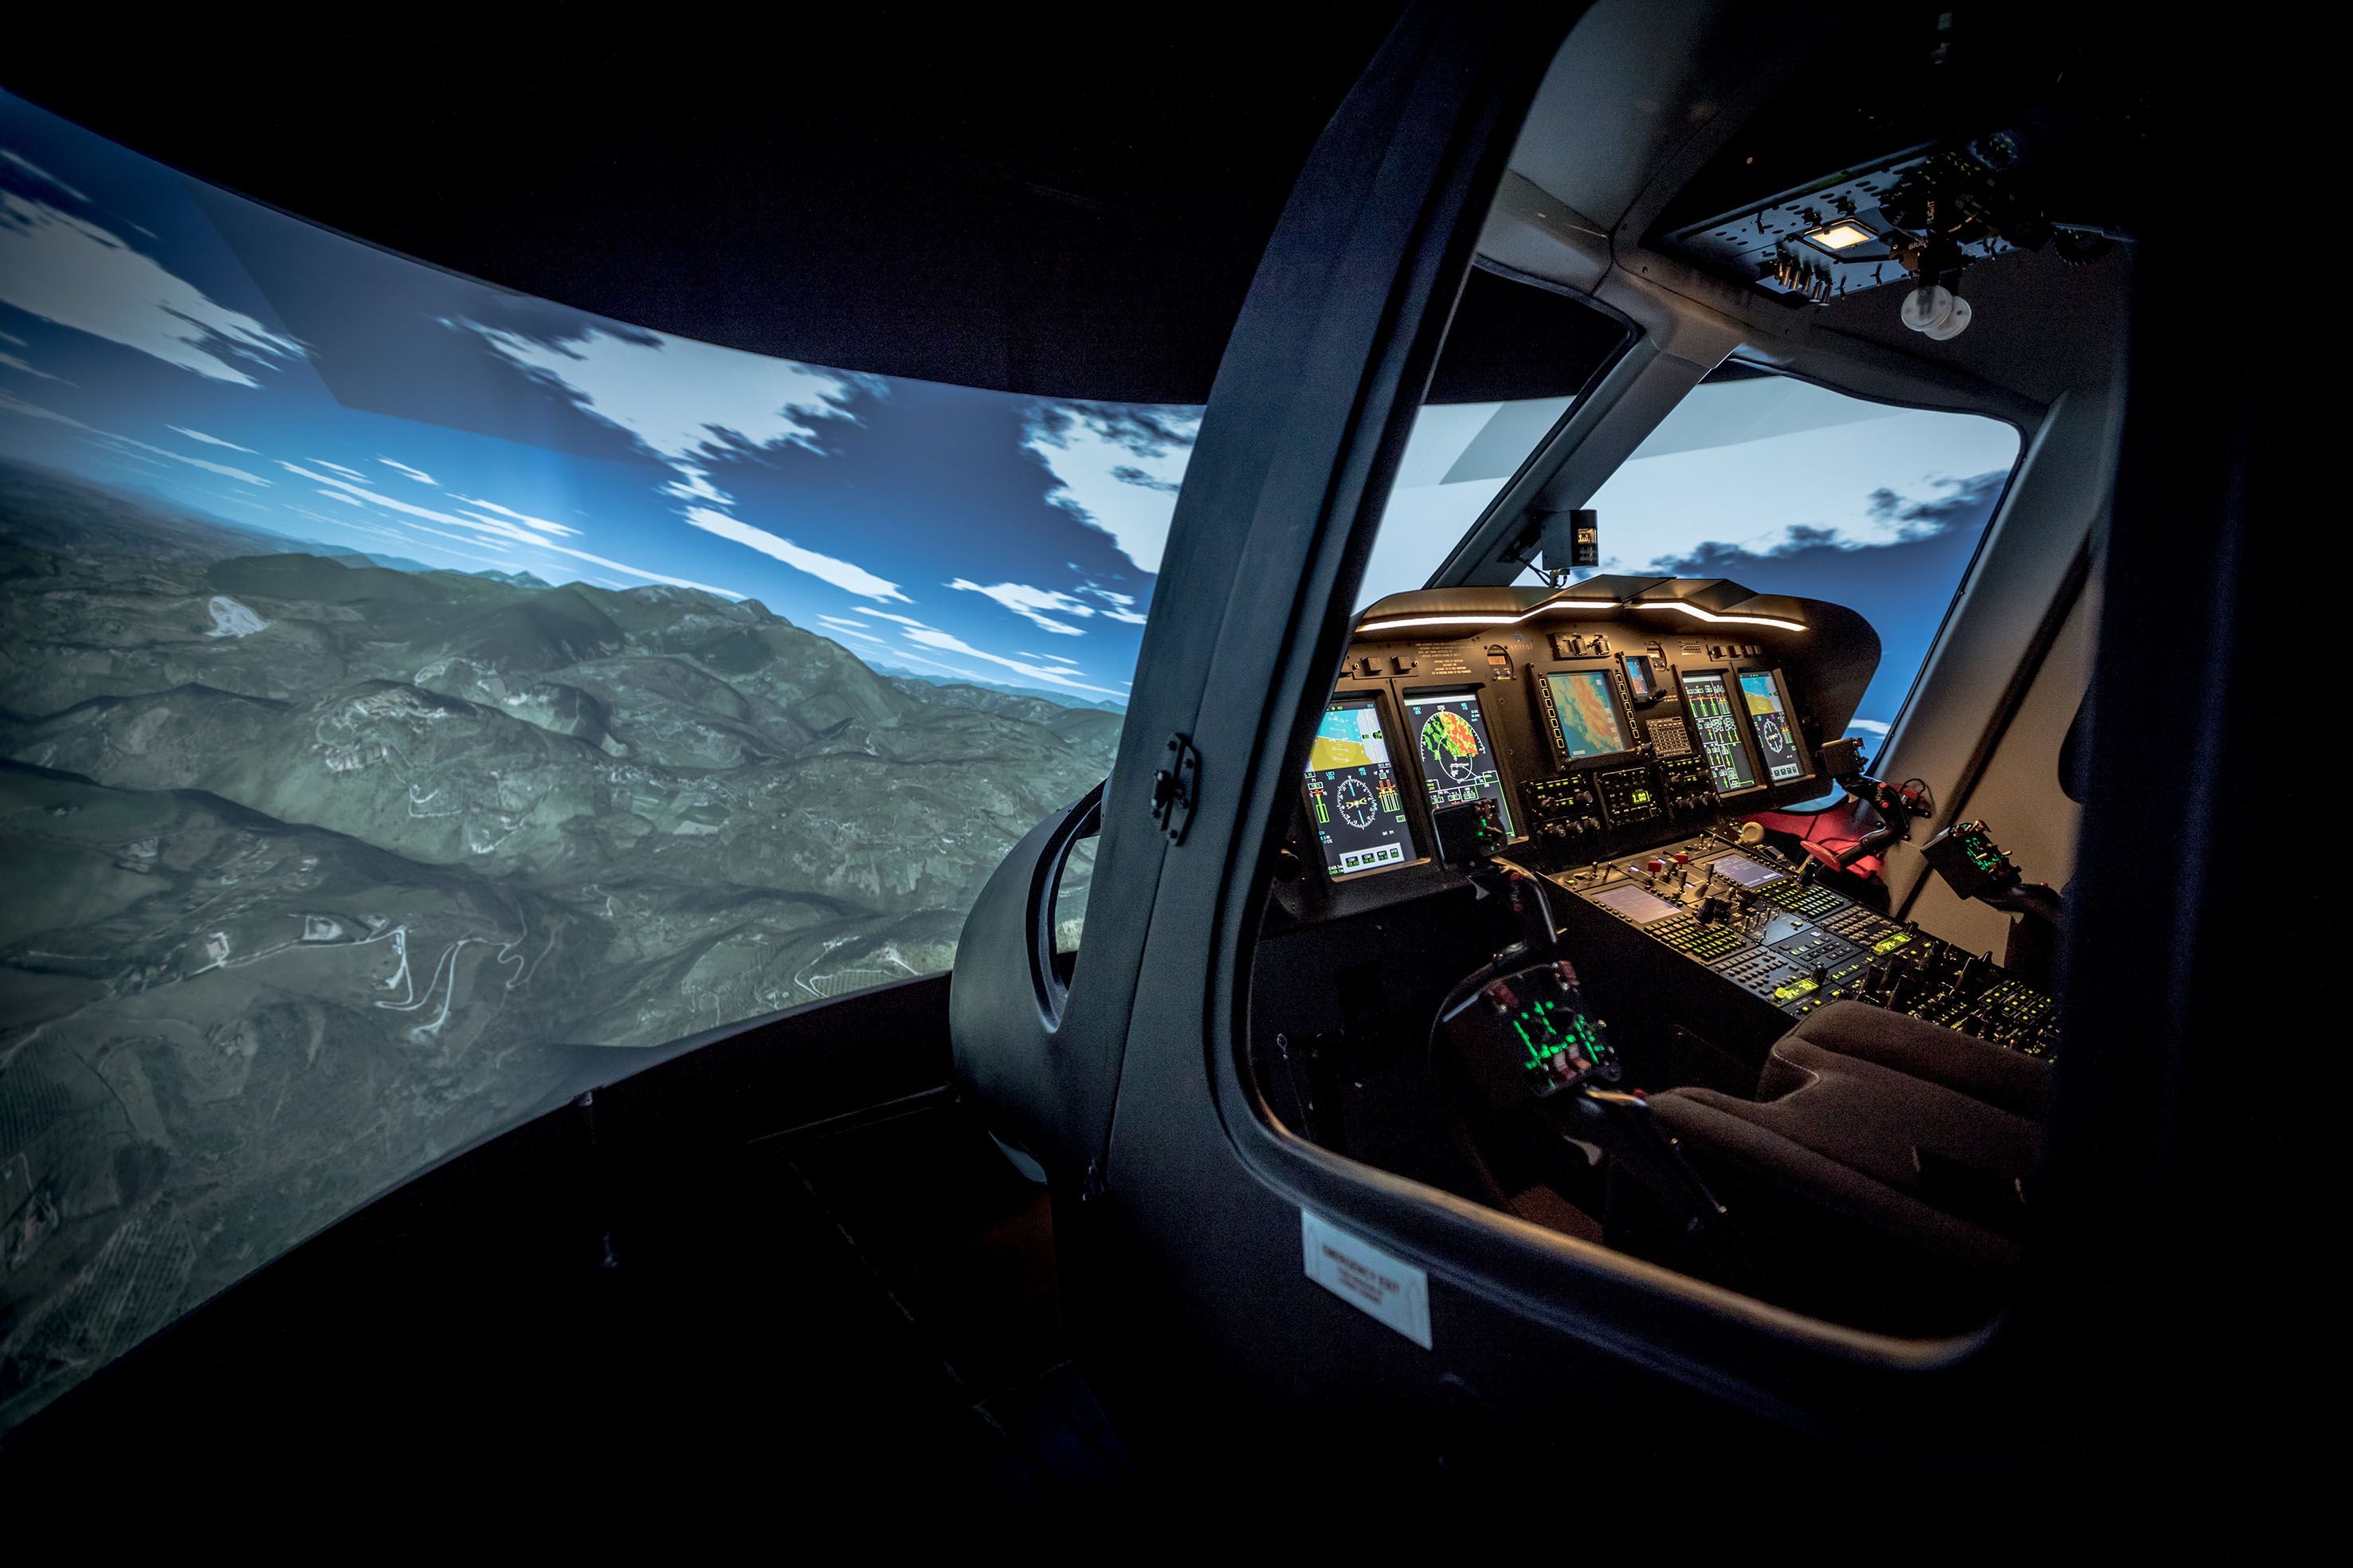 Nakanihon receives AW139 simulator from Entrol